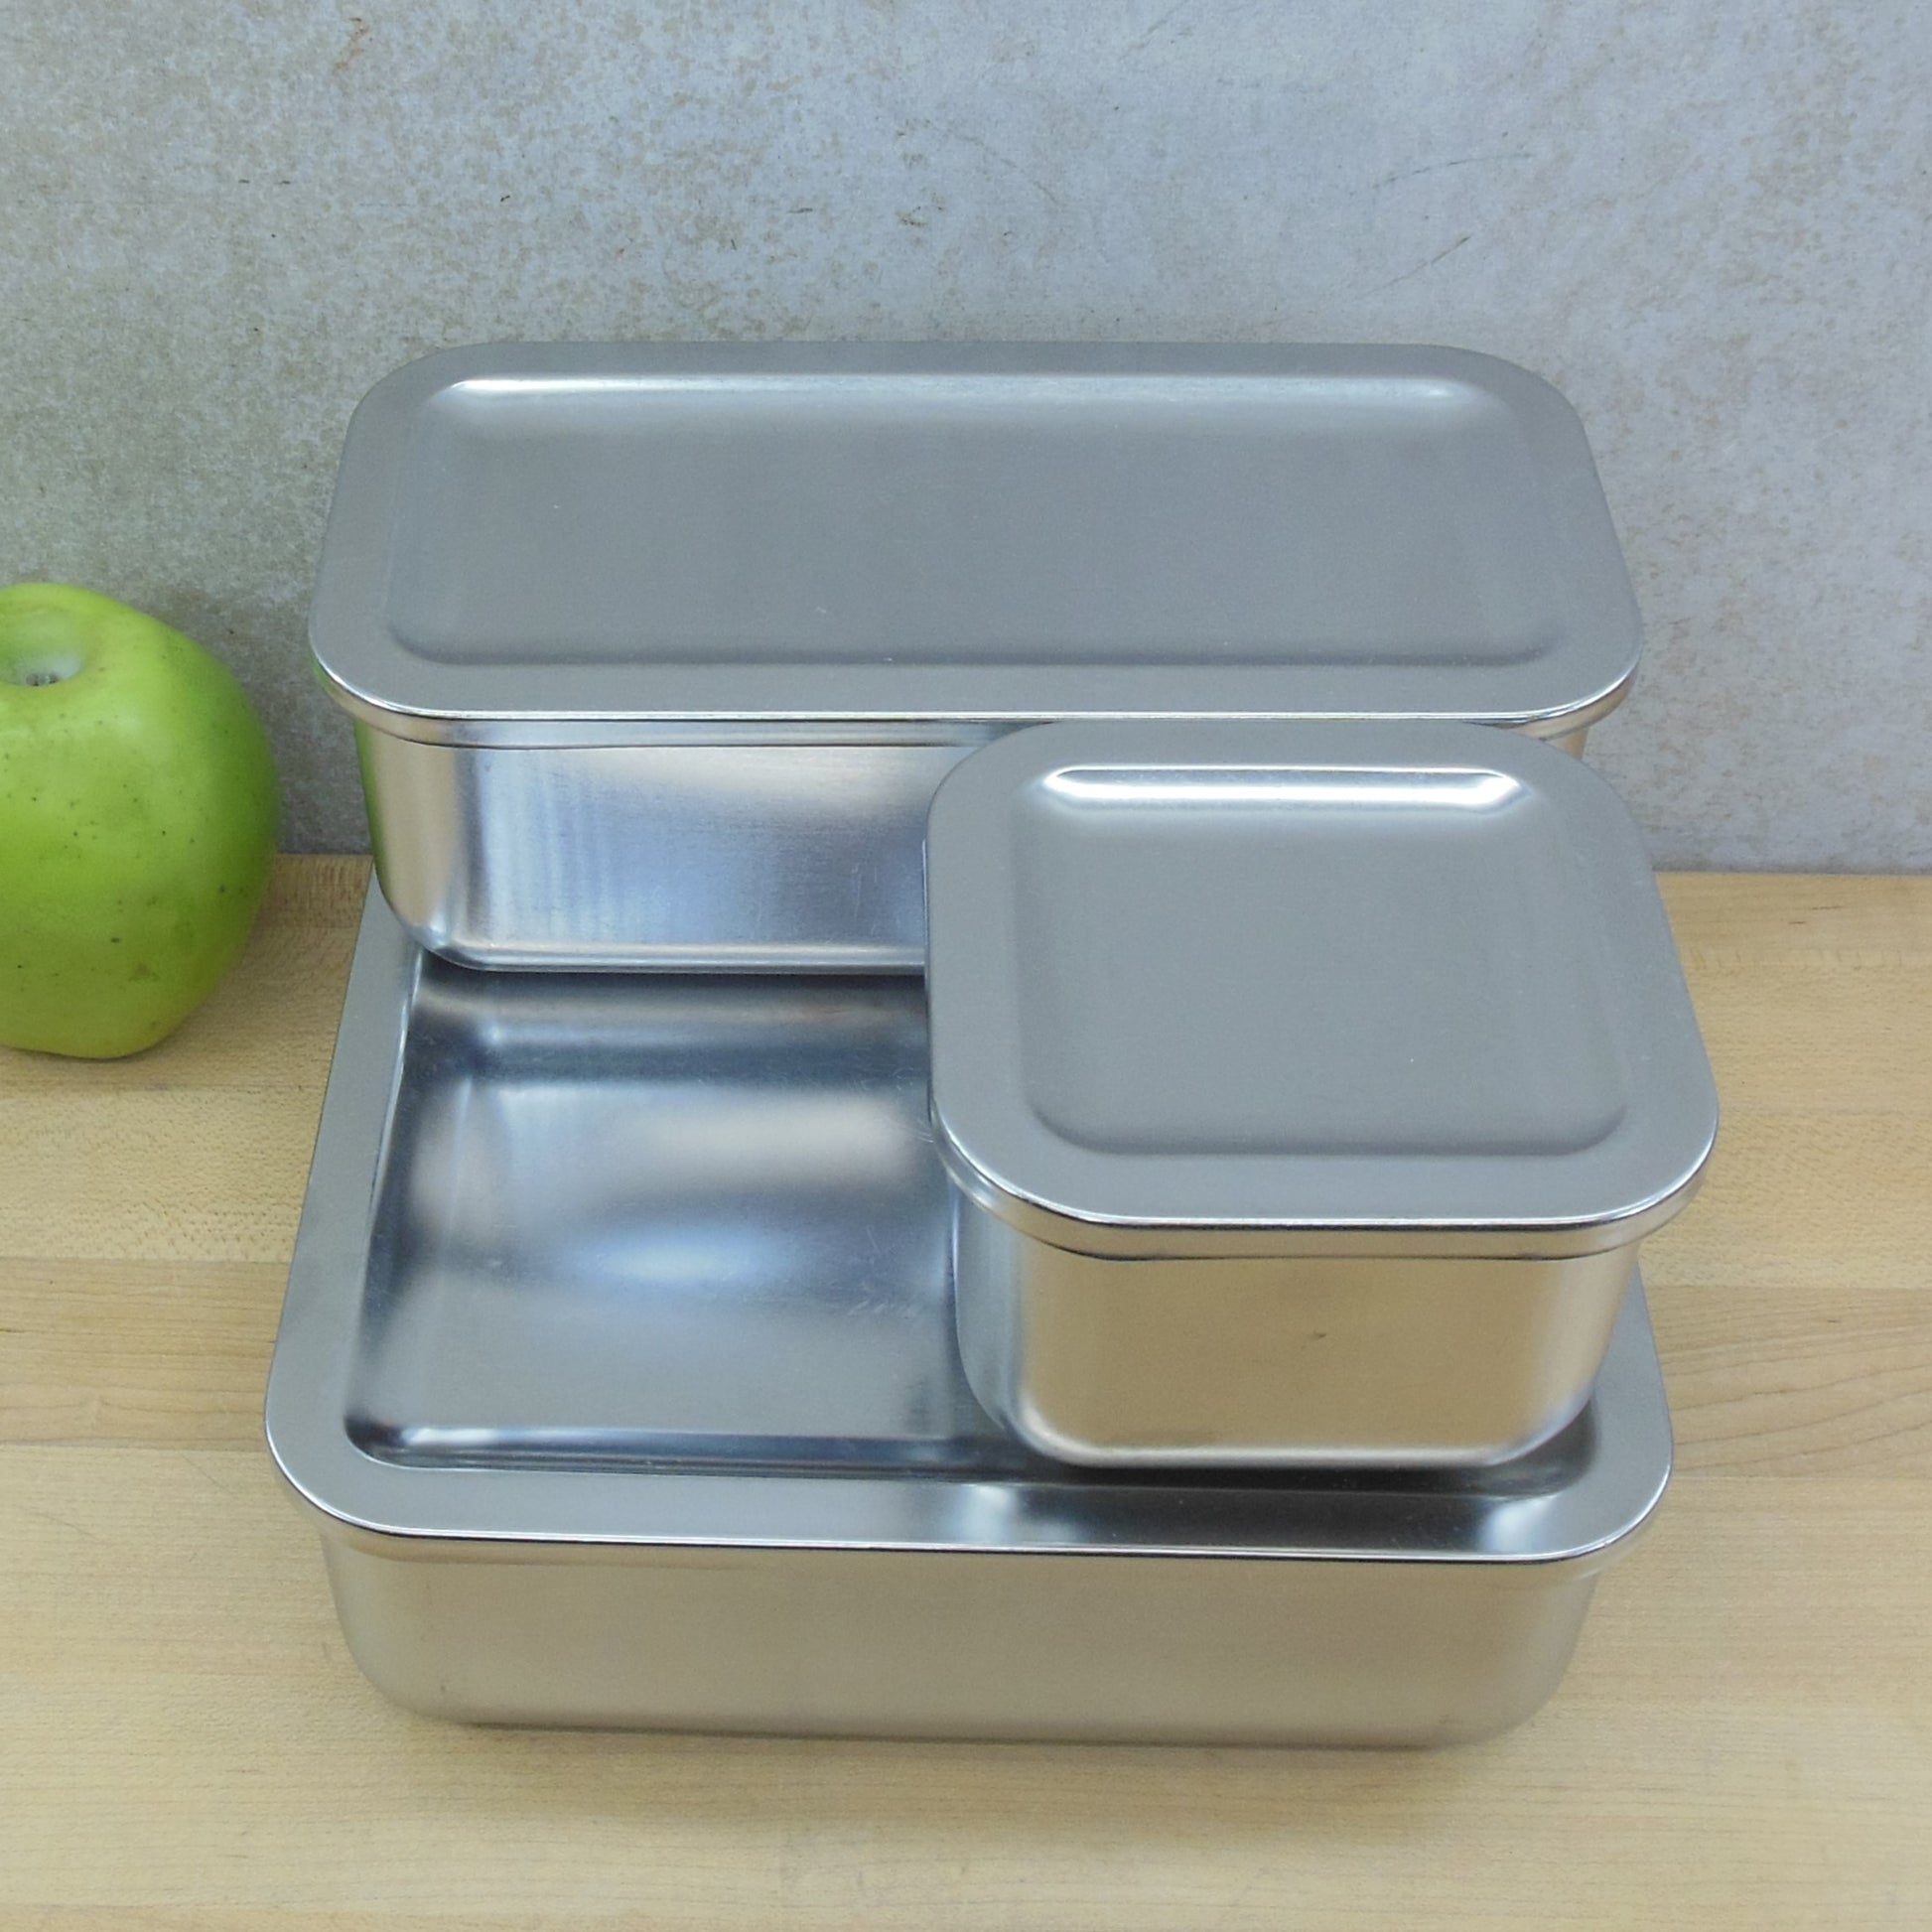 Revere Ware Stainless 3 Set Refrigerator Dishes Storage Containers